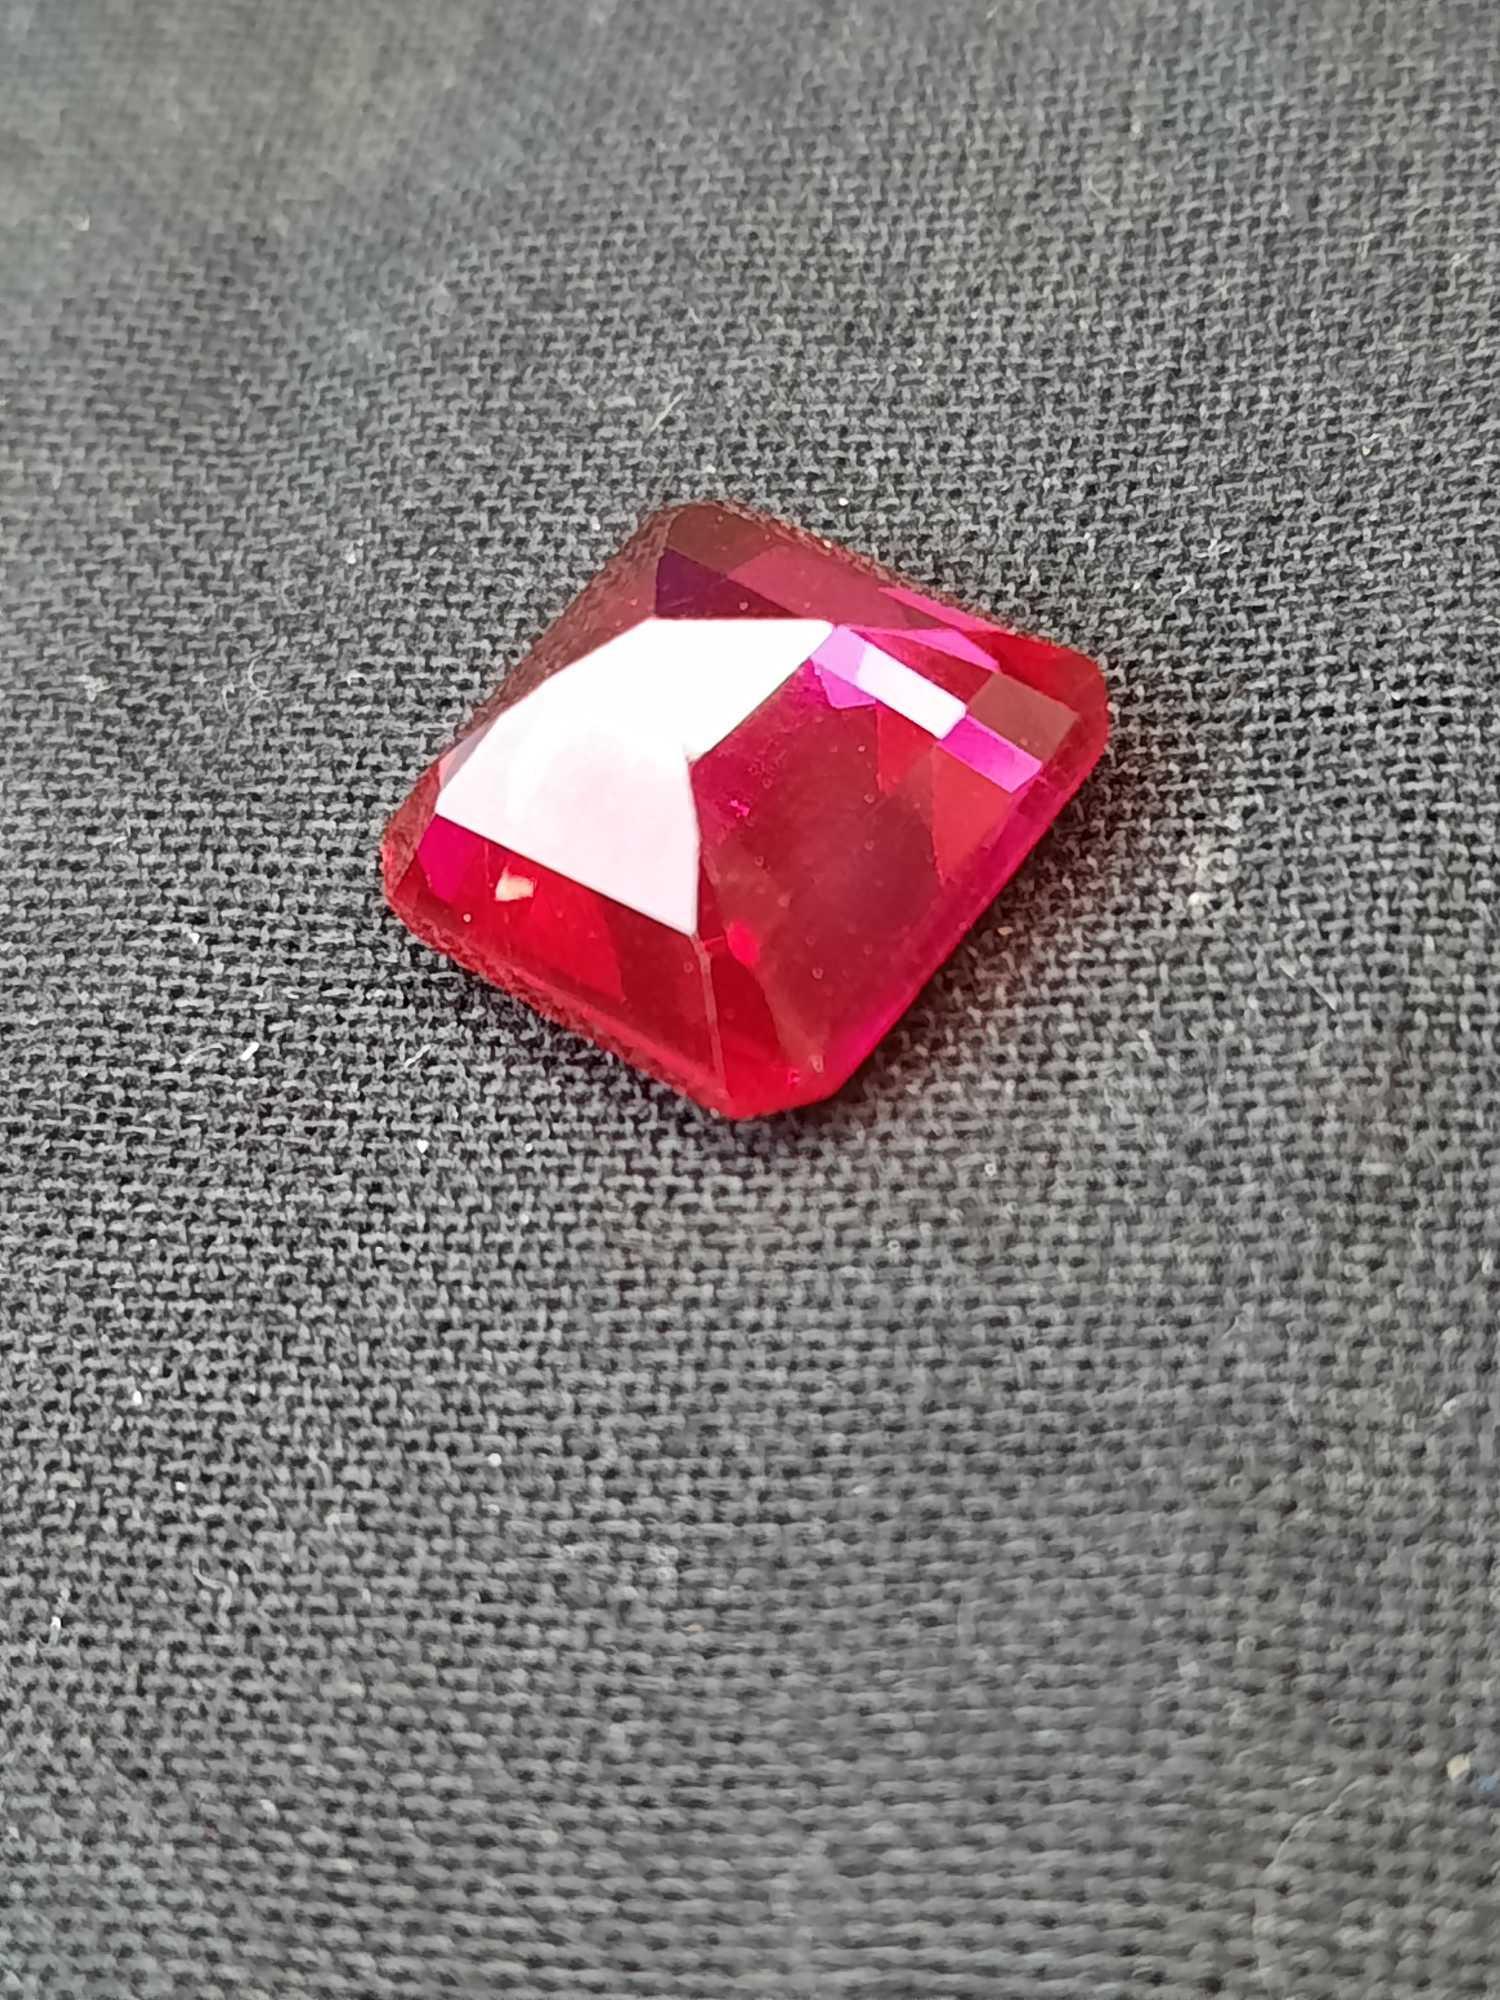 8.55ct Blood Red Ruby Natural Mined Gem Stone Genuine w/ GIE Card